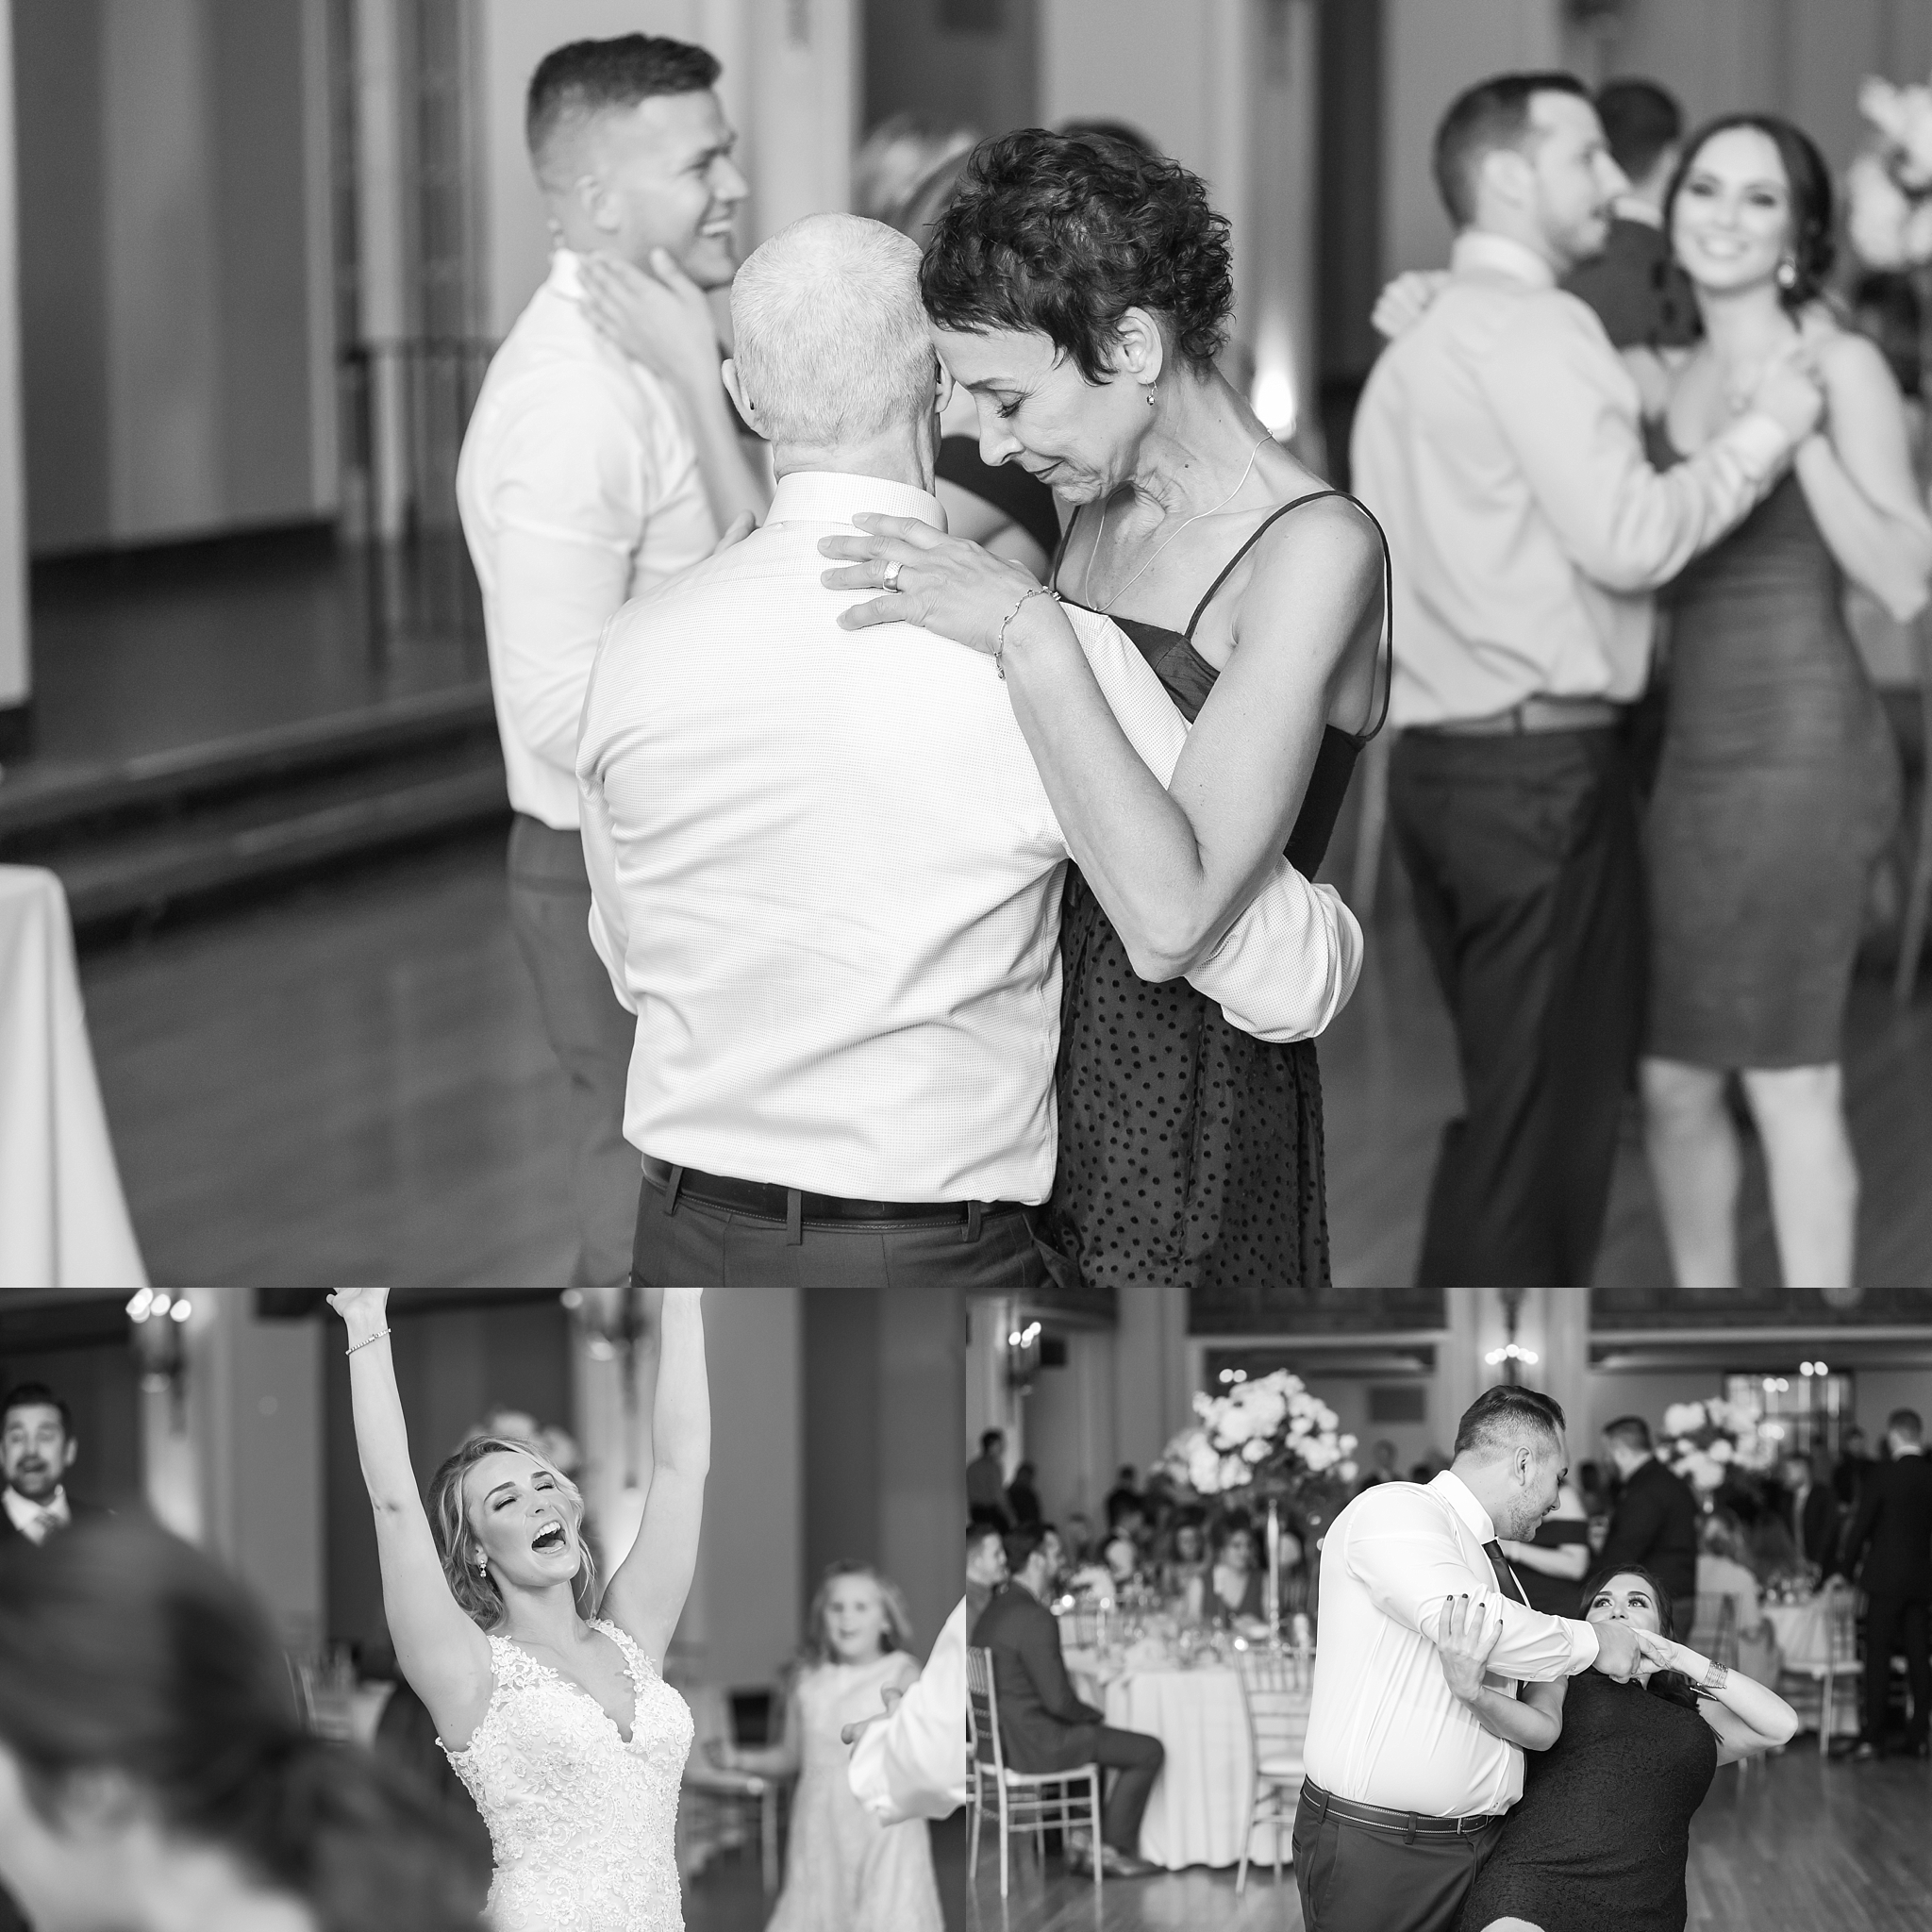 candid-romantic-wedding-photos-at-the-masonic-temple-belle-isle-detroit-institute-of-arts-in-detroit-michigan-by-courtney-carolyn-photography_0115.jpg